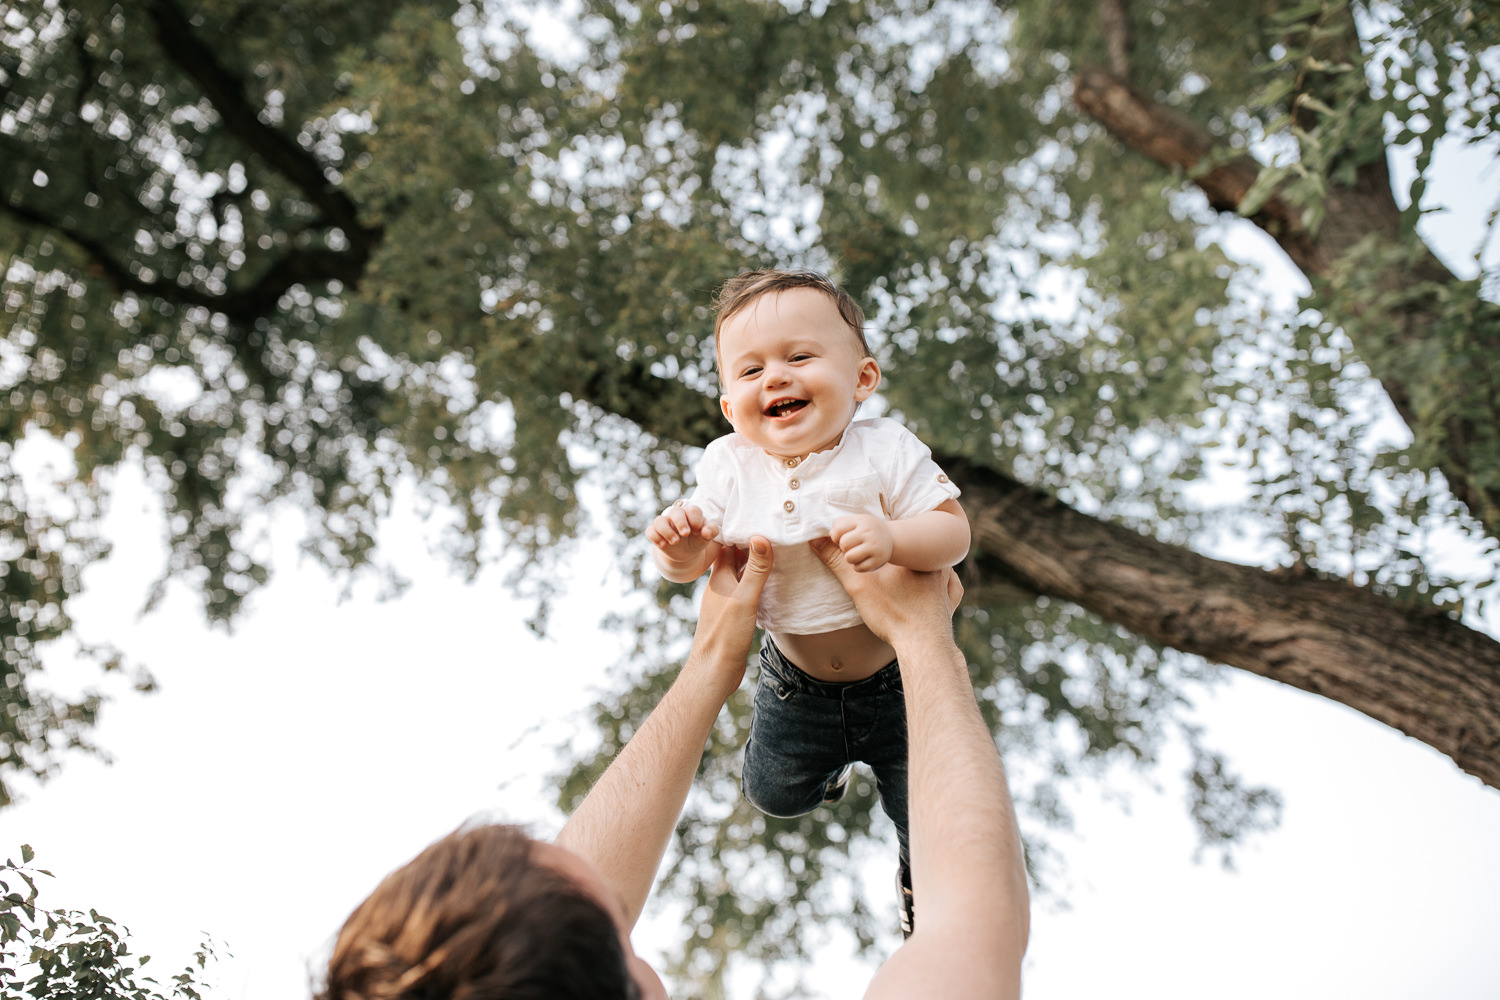 9 month old baby boy with dark brown hair wearing white t-shirt and jeans laughing as dad throws him in air under trees in park - GTA Lifestyle Photos